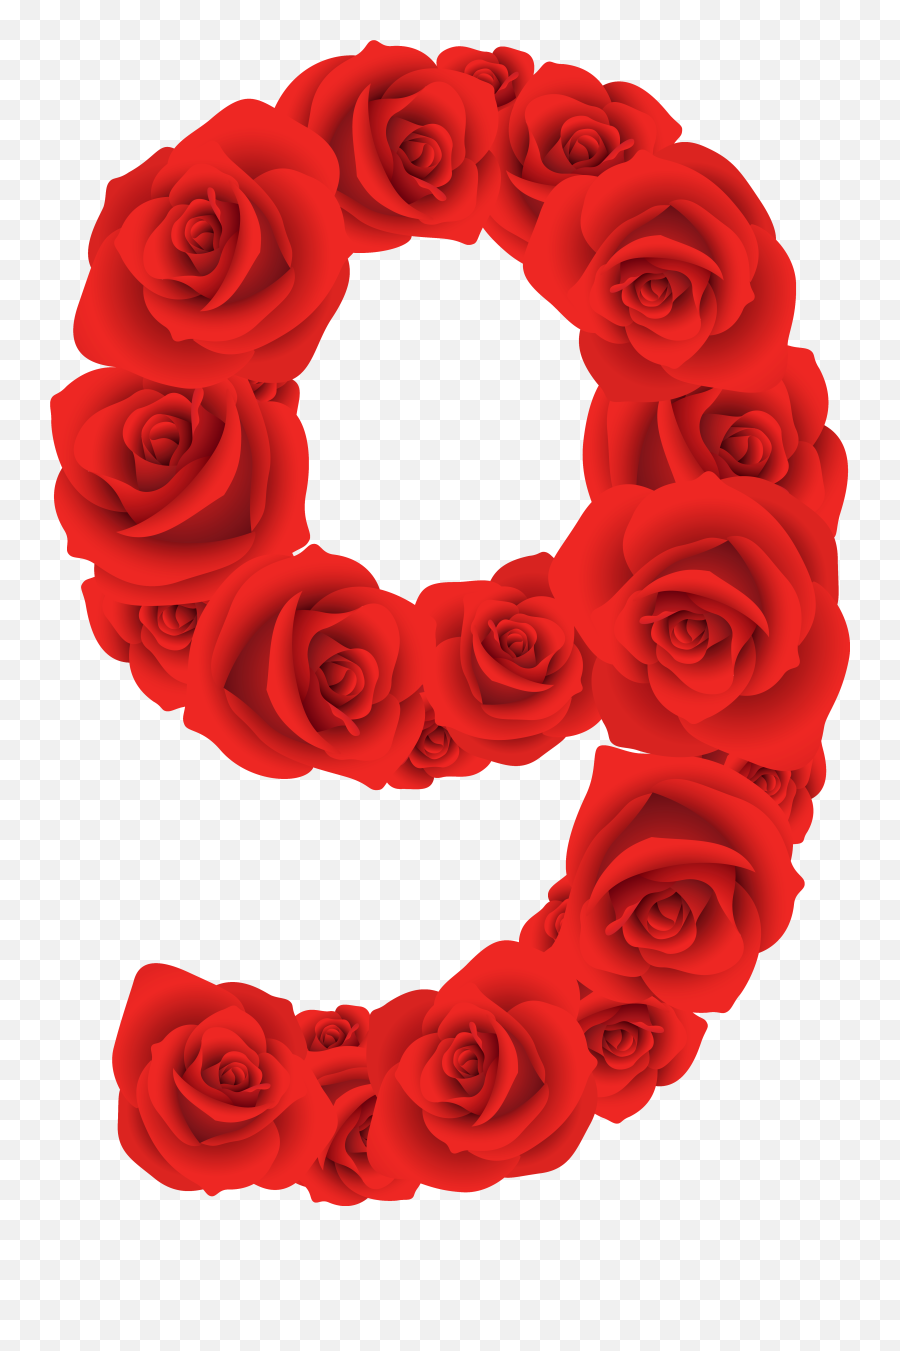 Red Roses Number Nine Png Clipart Image Gallery Rosas Rojas